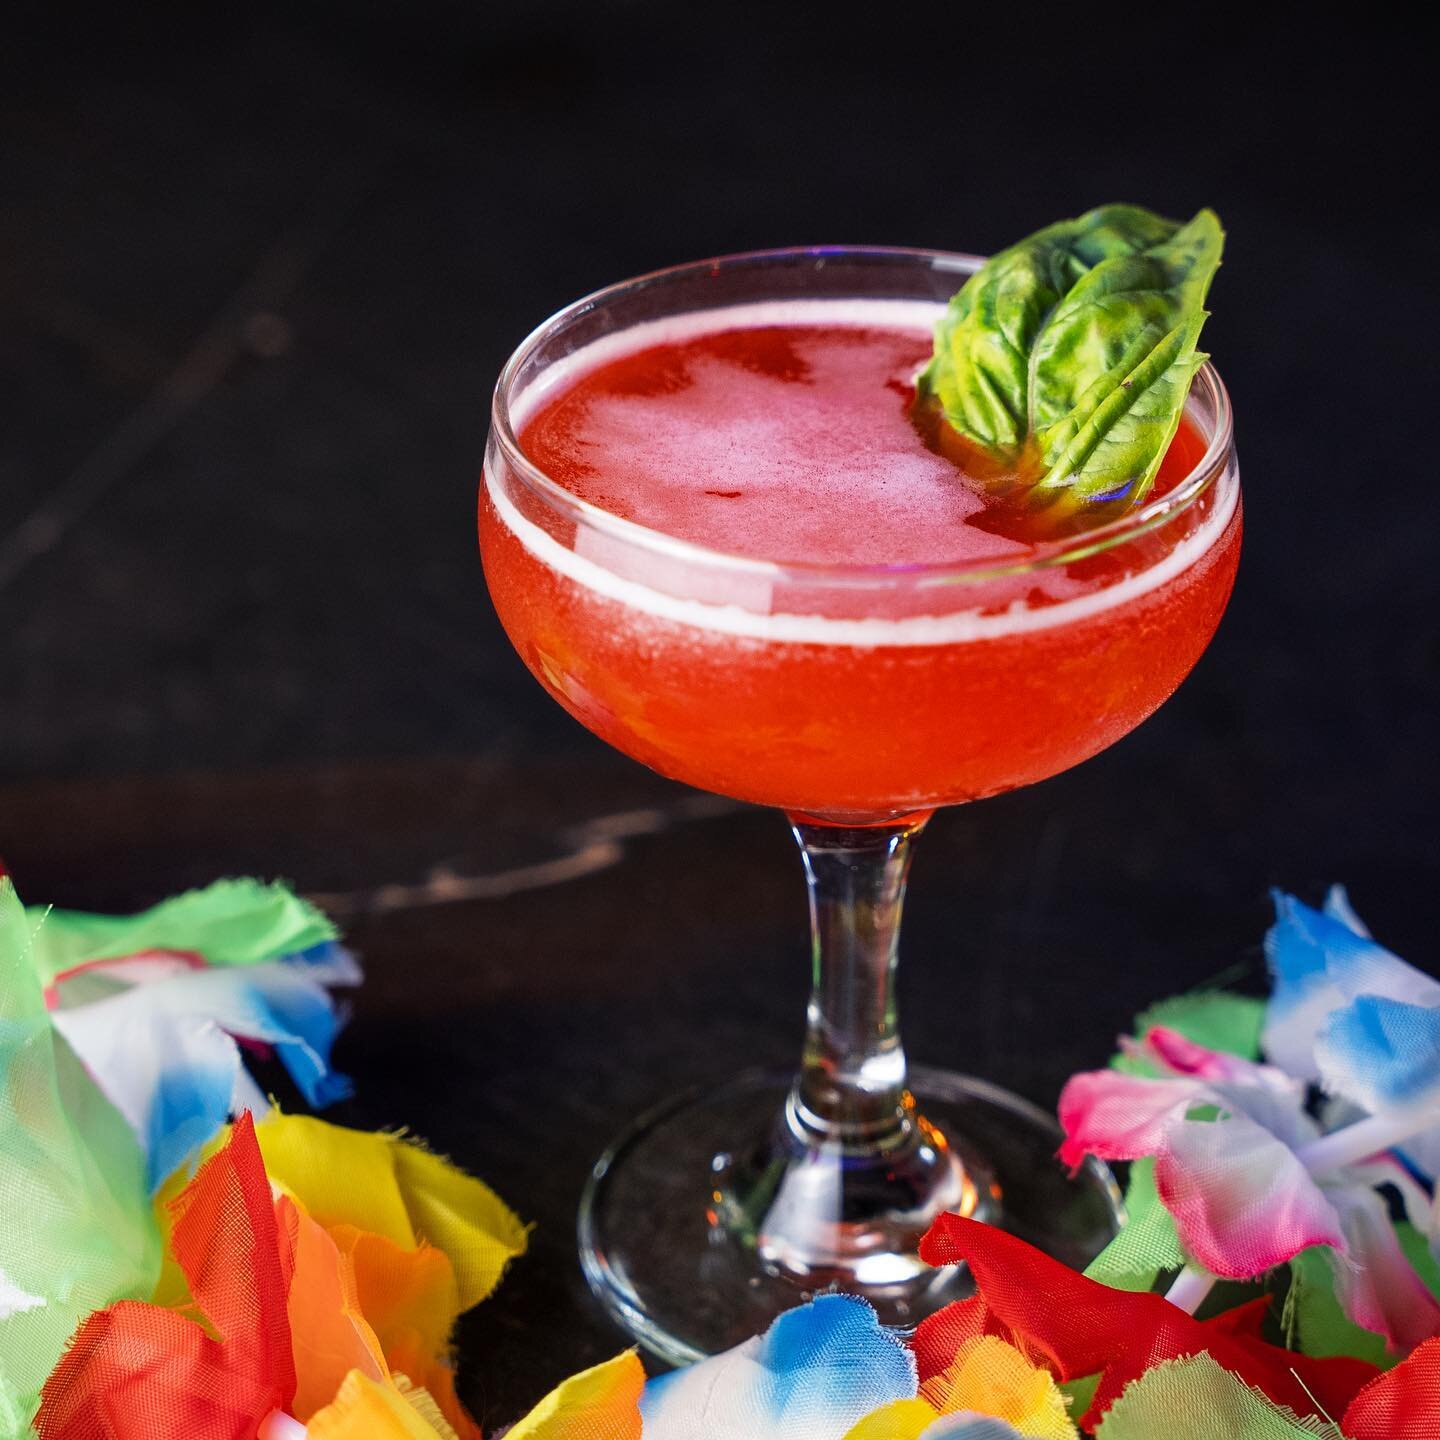 If you need to add a little pep in your step on this rainy day, may we suggest Pony Up! This cocktail is a lovely mix of rhum agricole, strawberry-basil shrub, honey &amp; lime. Enjoy one of these during trivia today starting at 6PM! @companyquestion